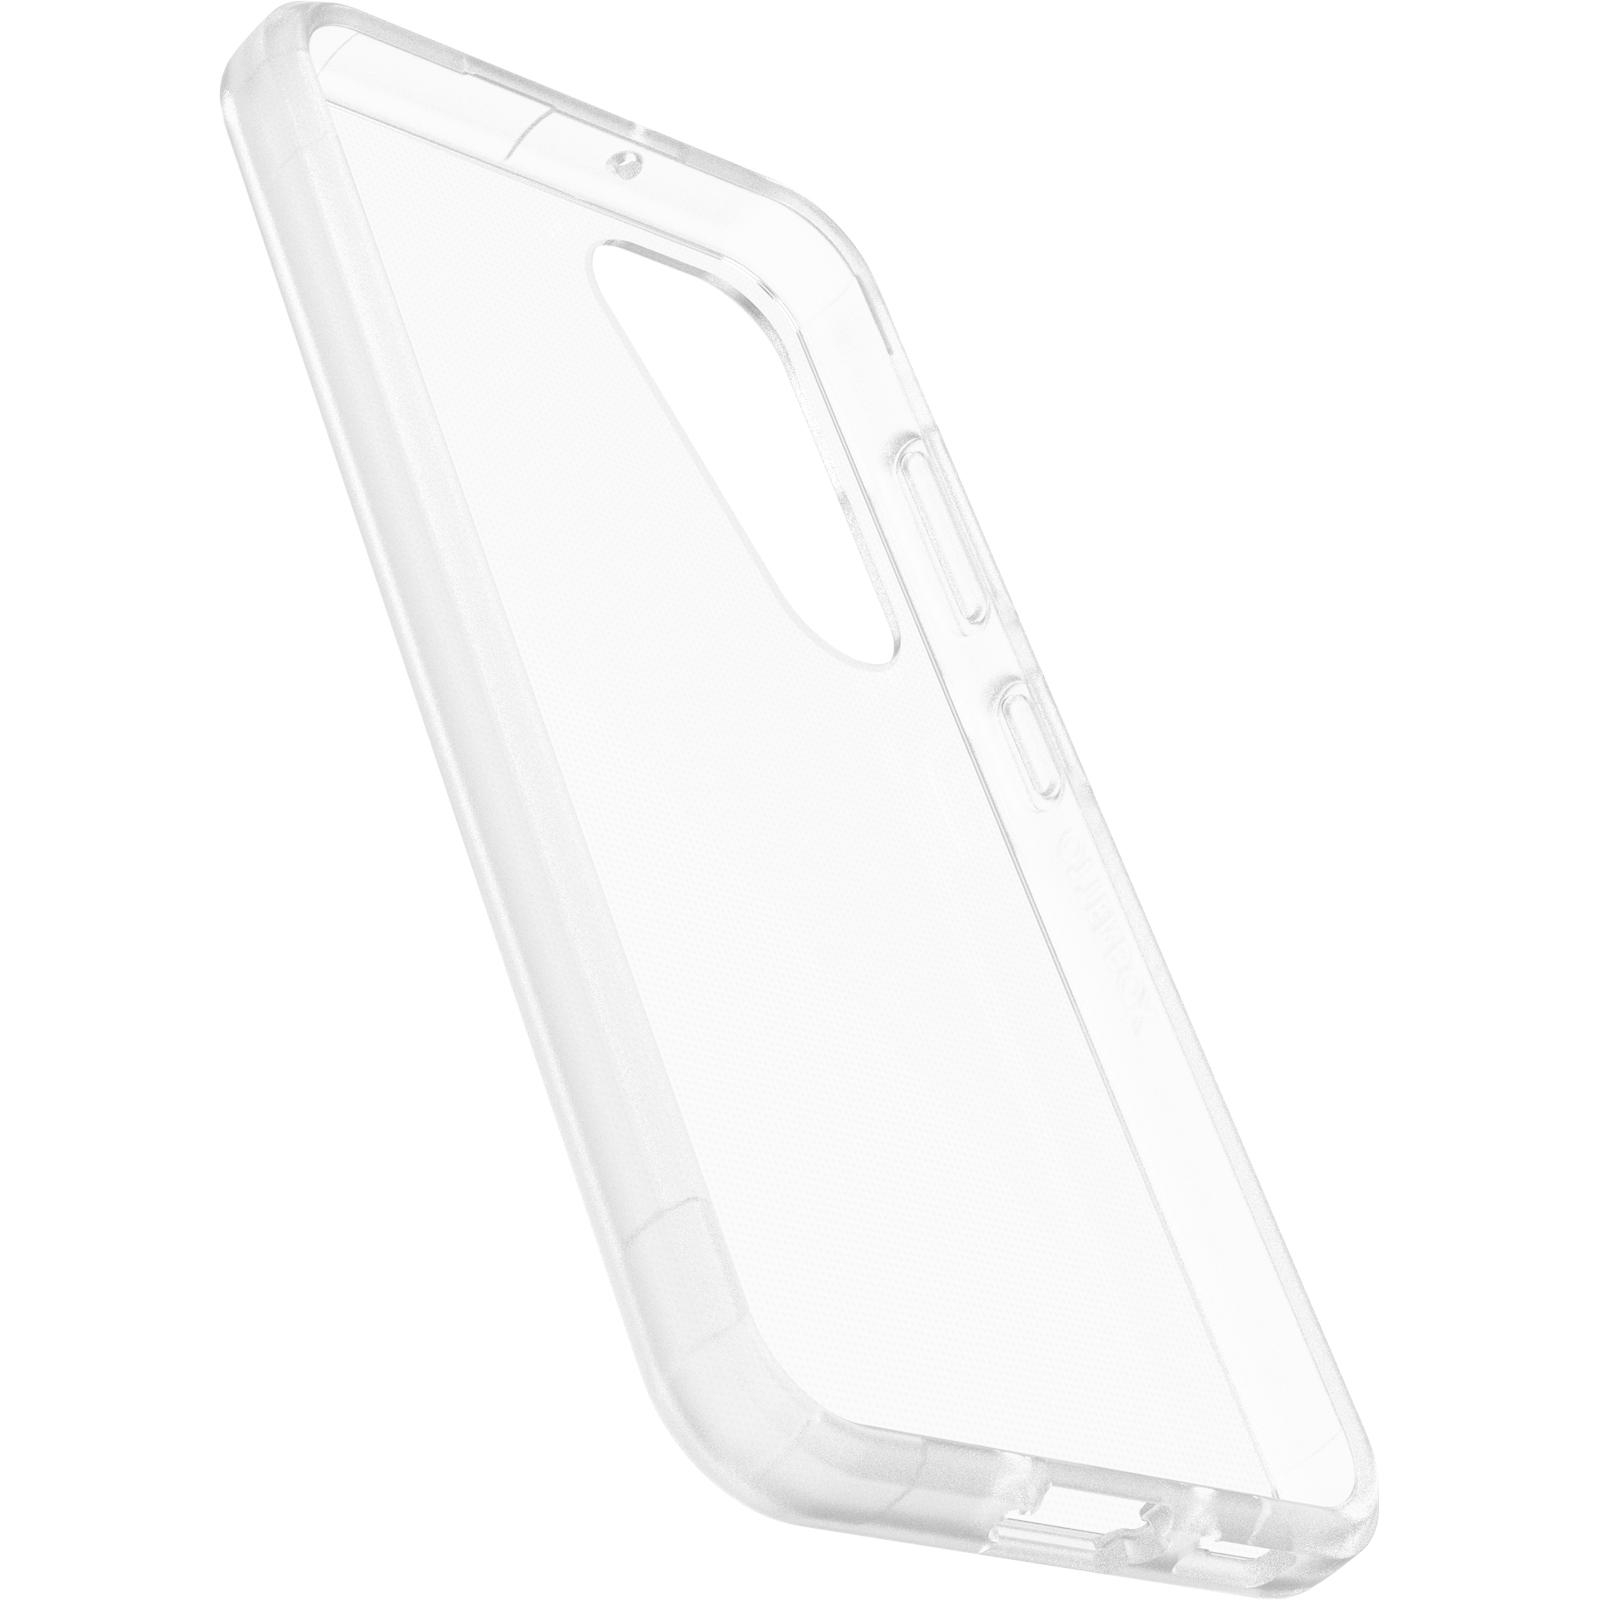 (30) S23, Samsung, Transparent OTTERBOX Galaxy Backcover, React,